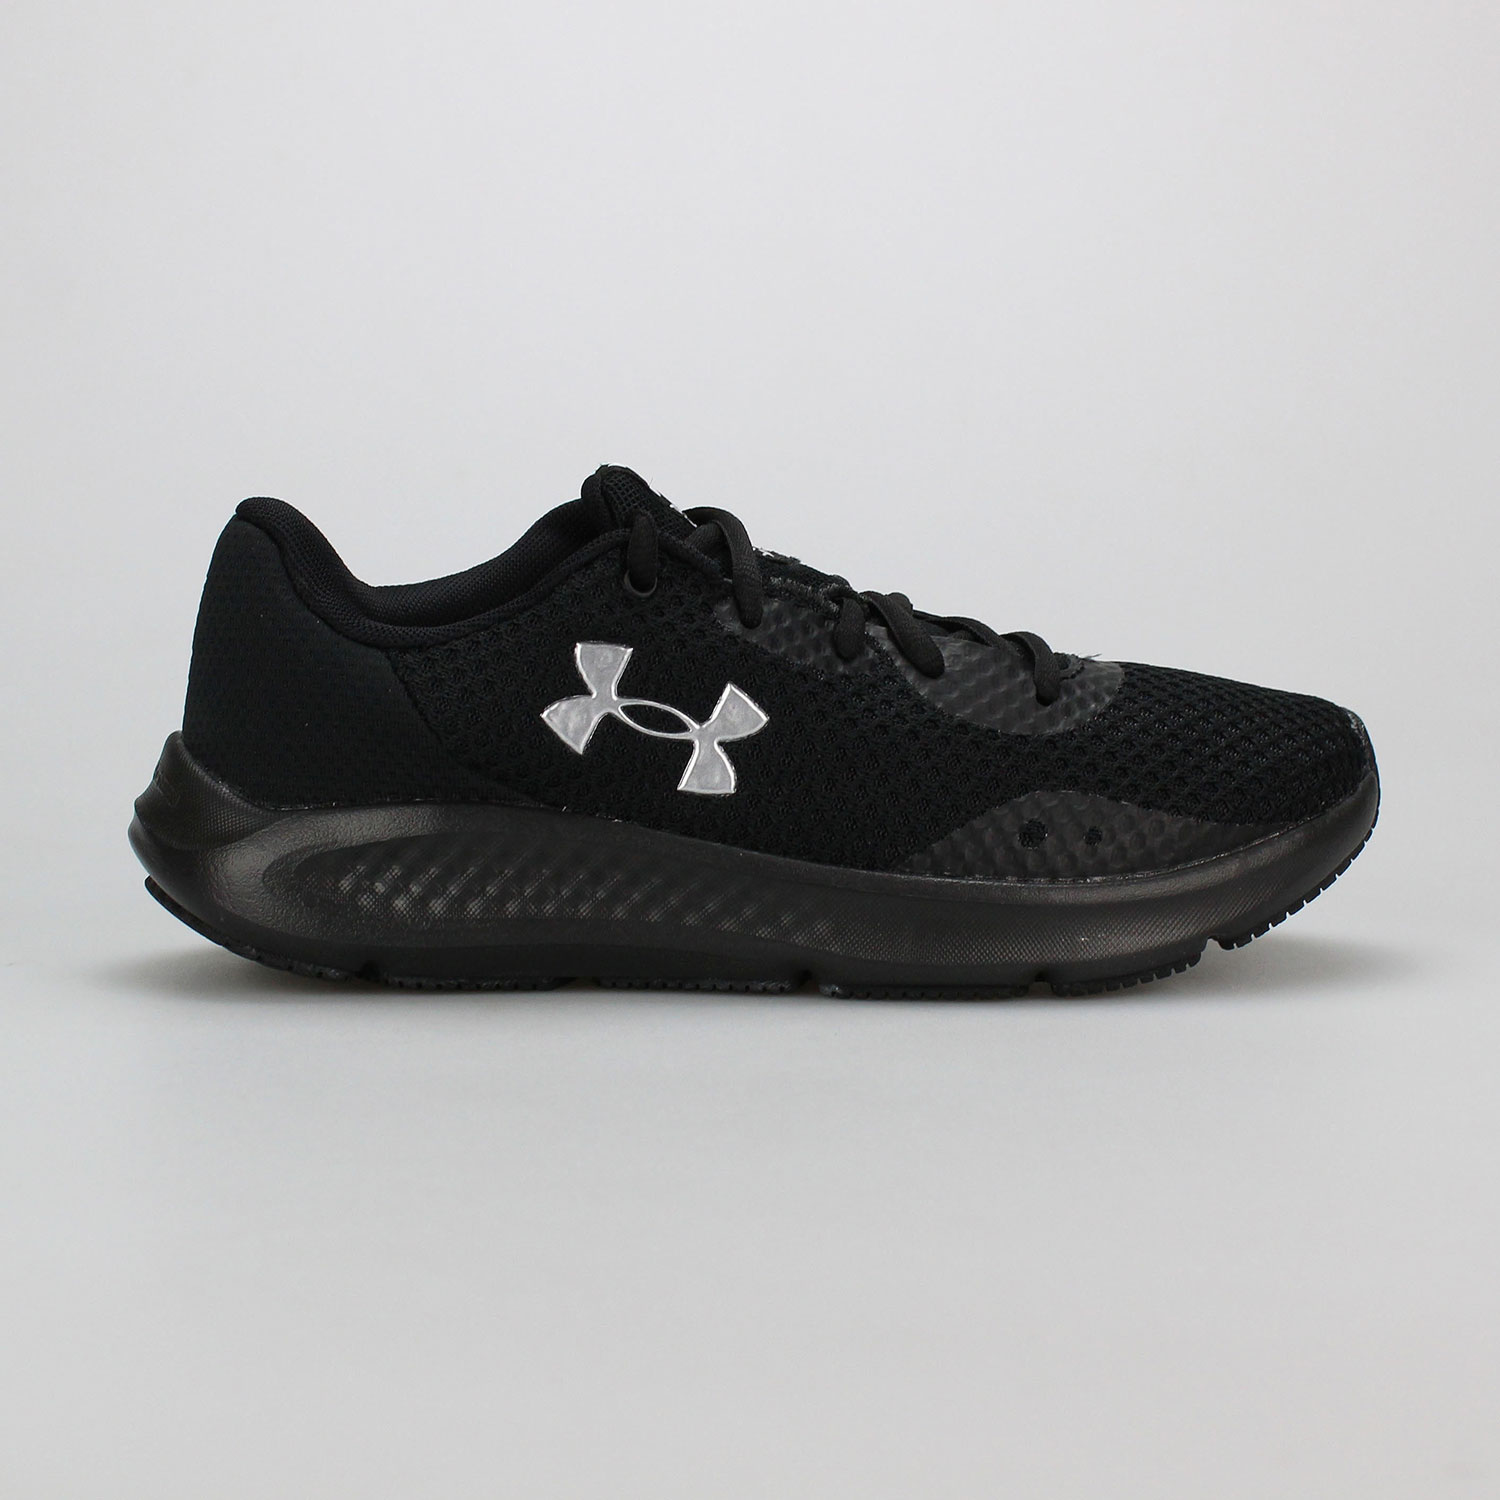 WOMEN'S UNDER ARMOUR CHARGED PURSUIT 3 ΜΑΥΡΟ ΓΥΝΑΙΚΕΙΑ ΡΟΥΧΑ ΚΑΙ ΠΑΠΟΥΤΣΙΑ > ΓΥΝΑΙΚΕΙΑ ΠΑΠΟΥΤΣΙΑ > ΤΡΕΞΙΜΟ